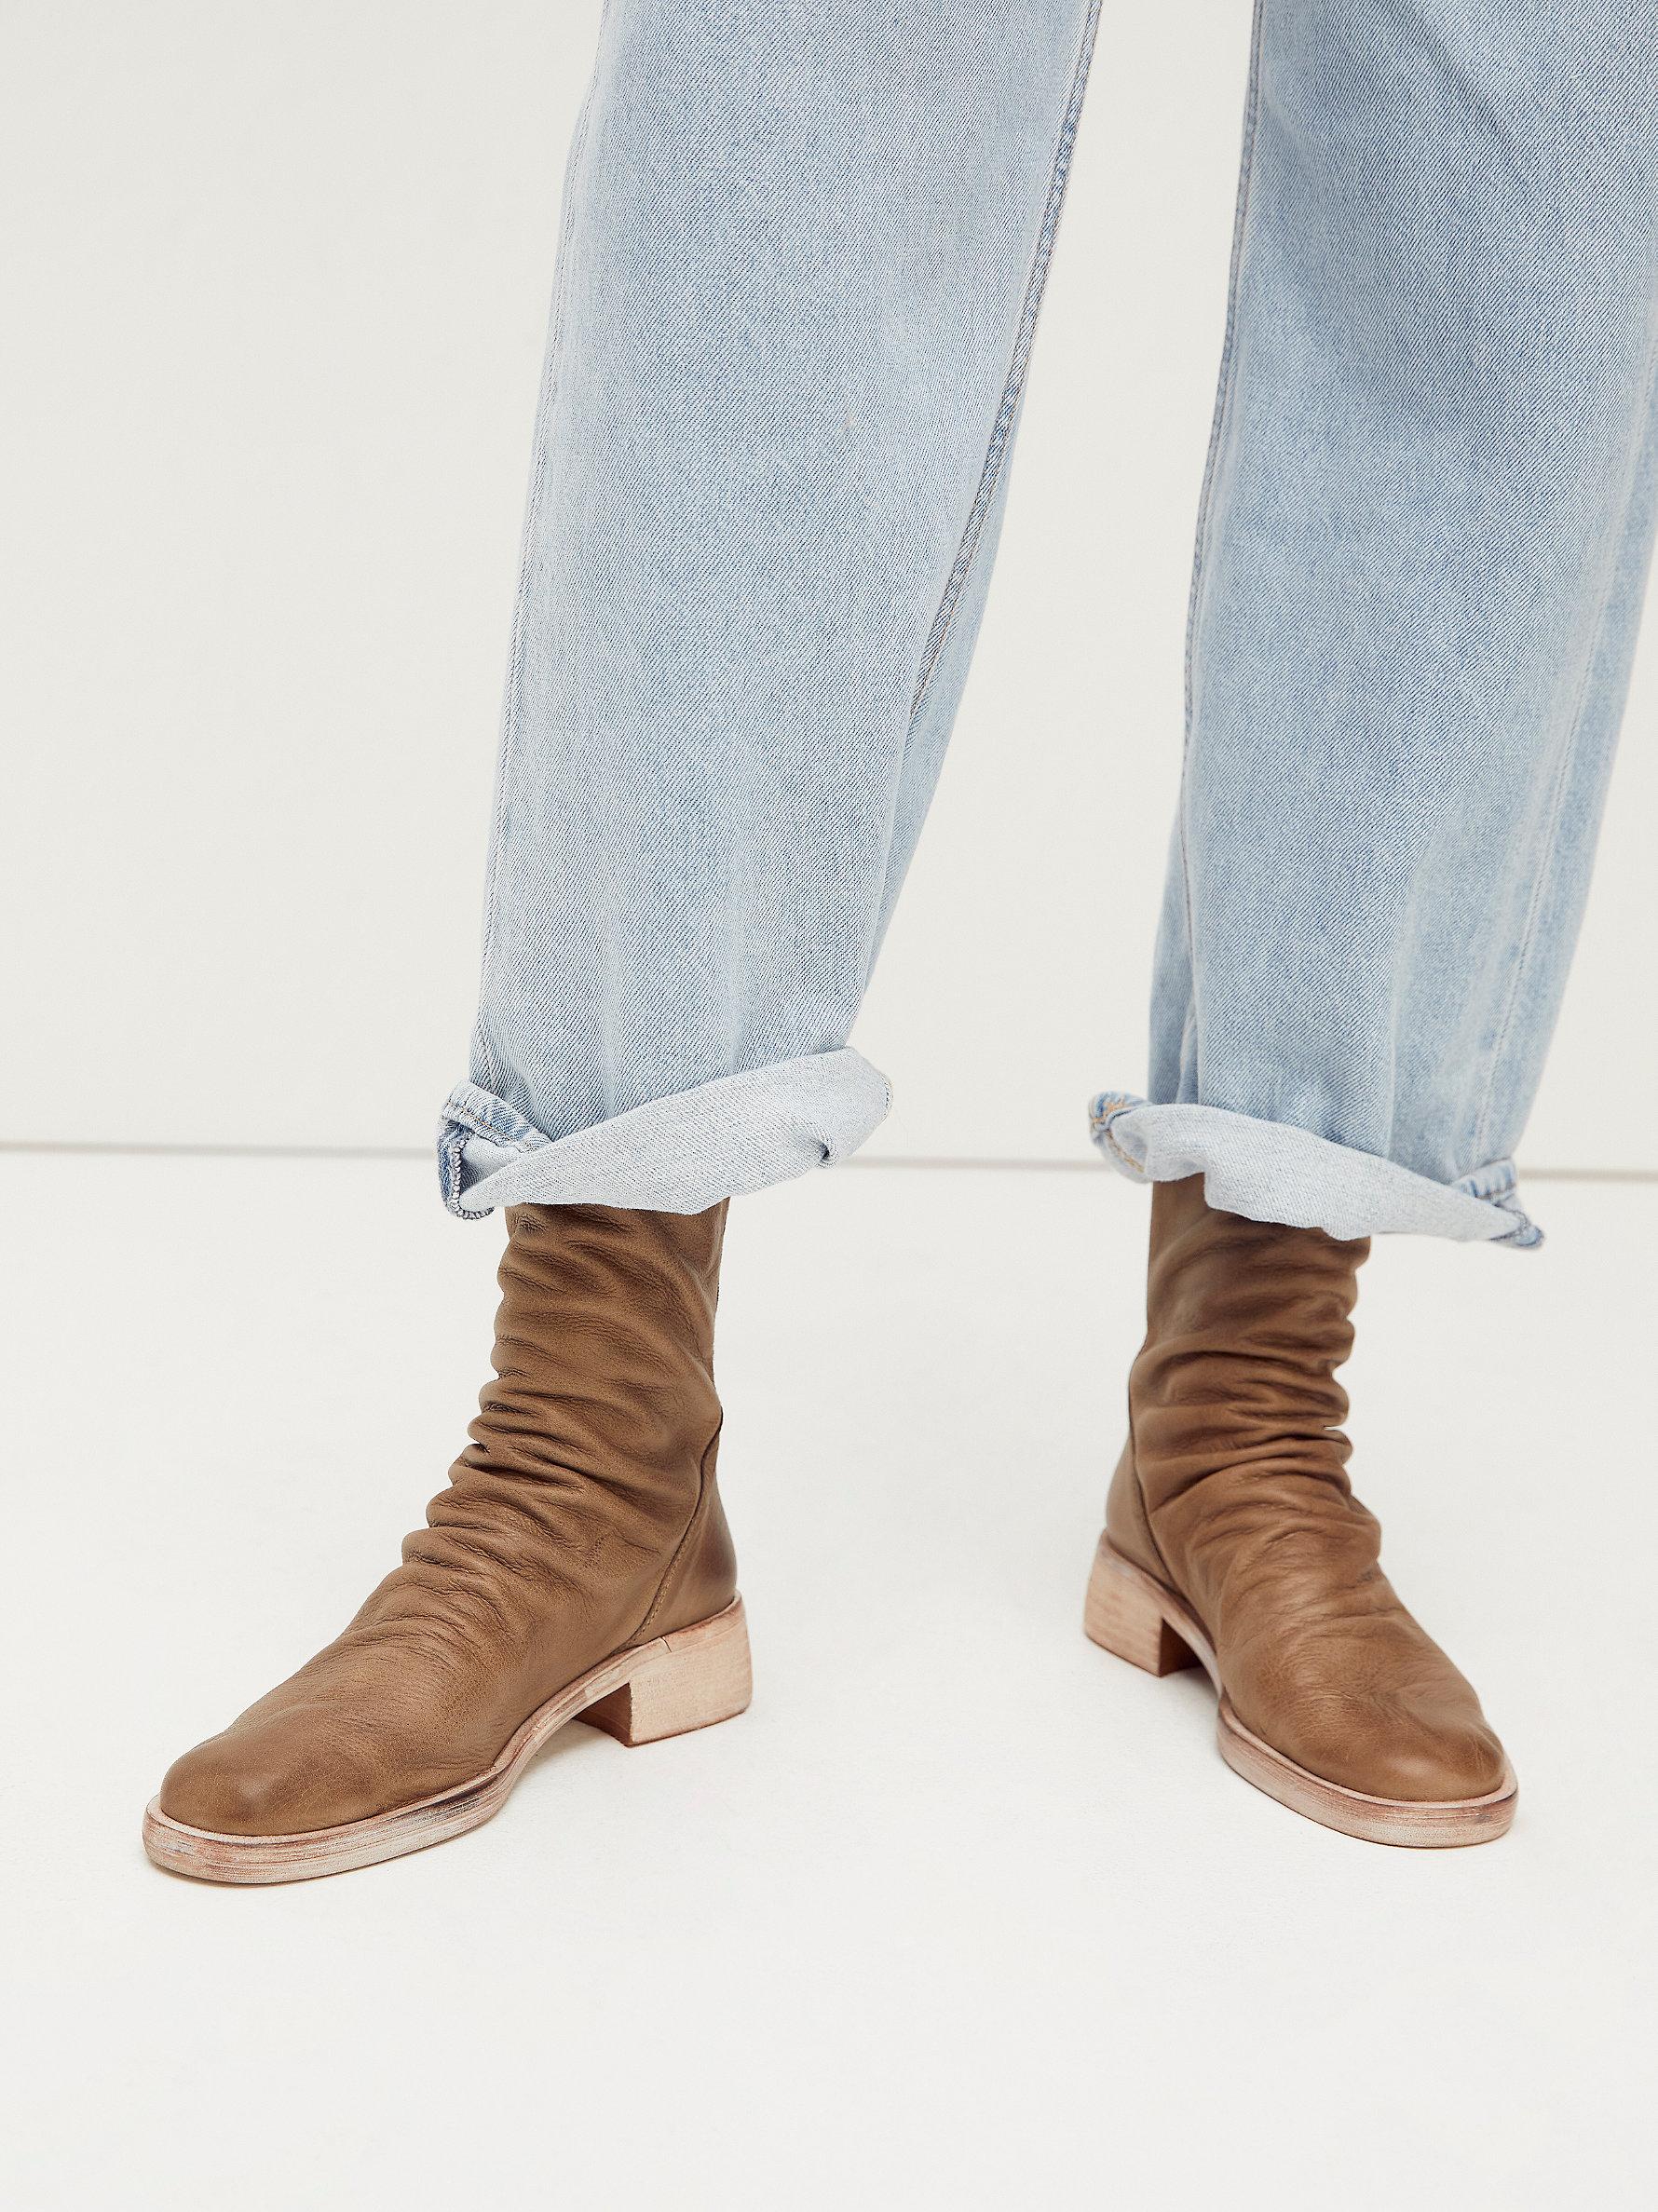 Free People Sutton Tight Slouch Boots in Blue | Lyst